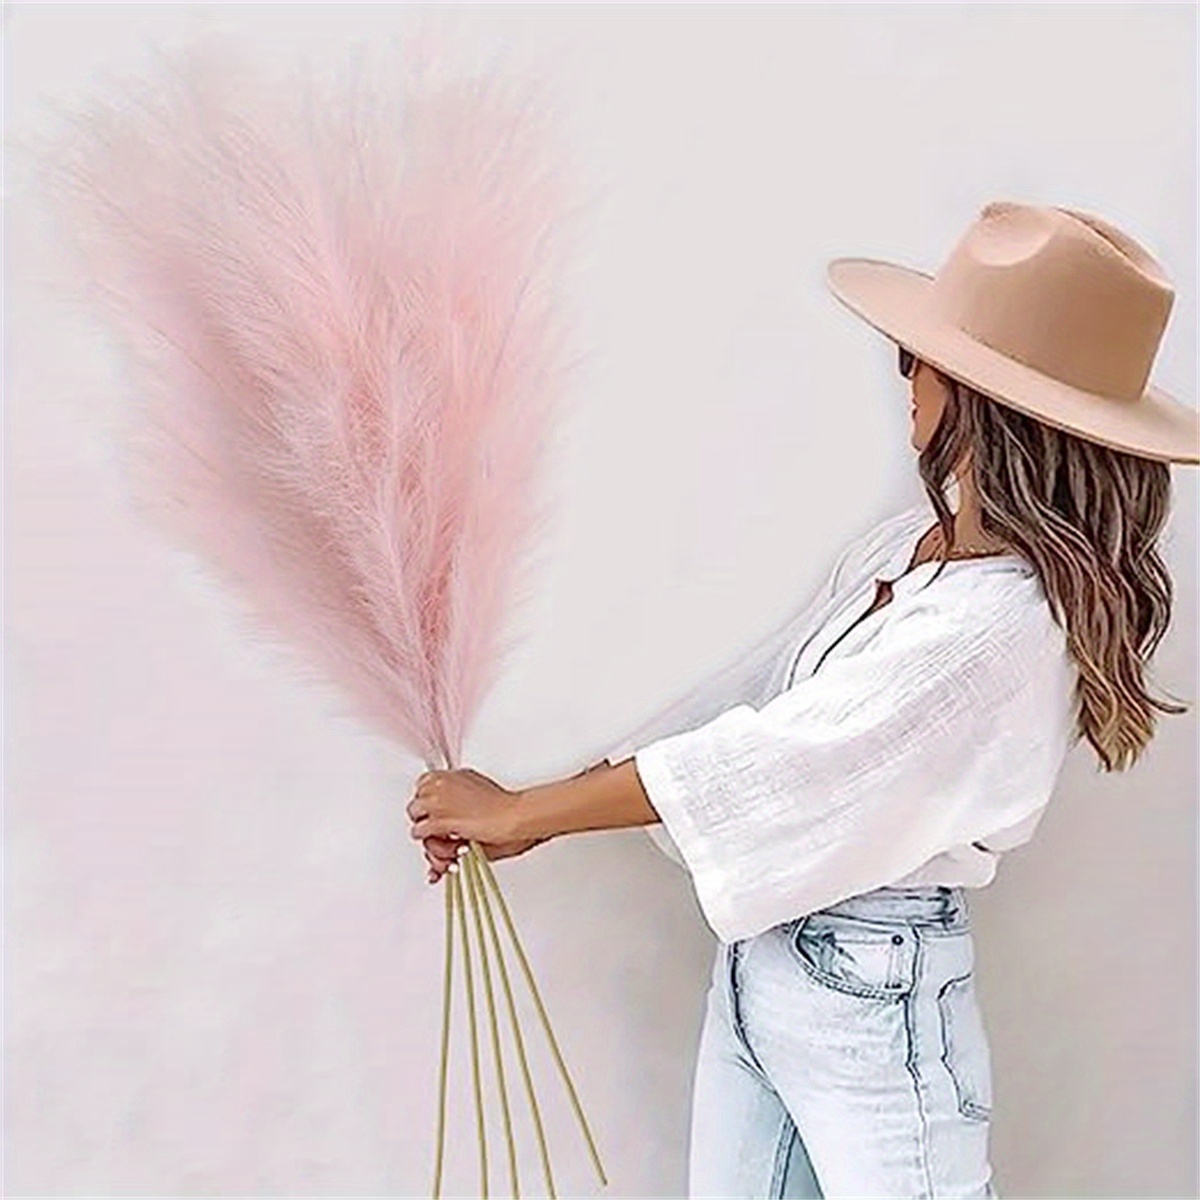 

Pack Of 4 Stems Large 43''/110cm Tall Faux Pampas Grass, Fake Pampas Floral Artificial Pampas Grass Branches Plants For Home Garden Kitchen Boho Decor Party Birthday, Mother's Day Gift